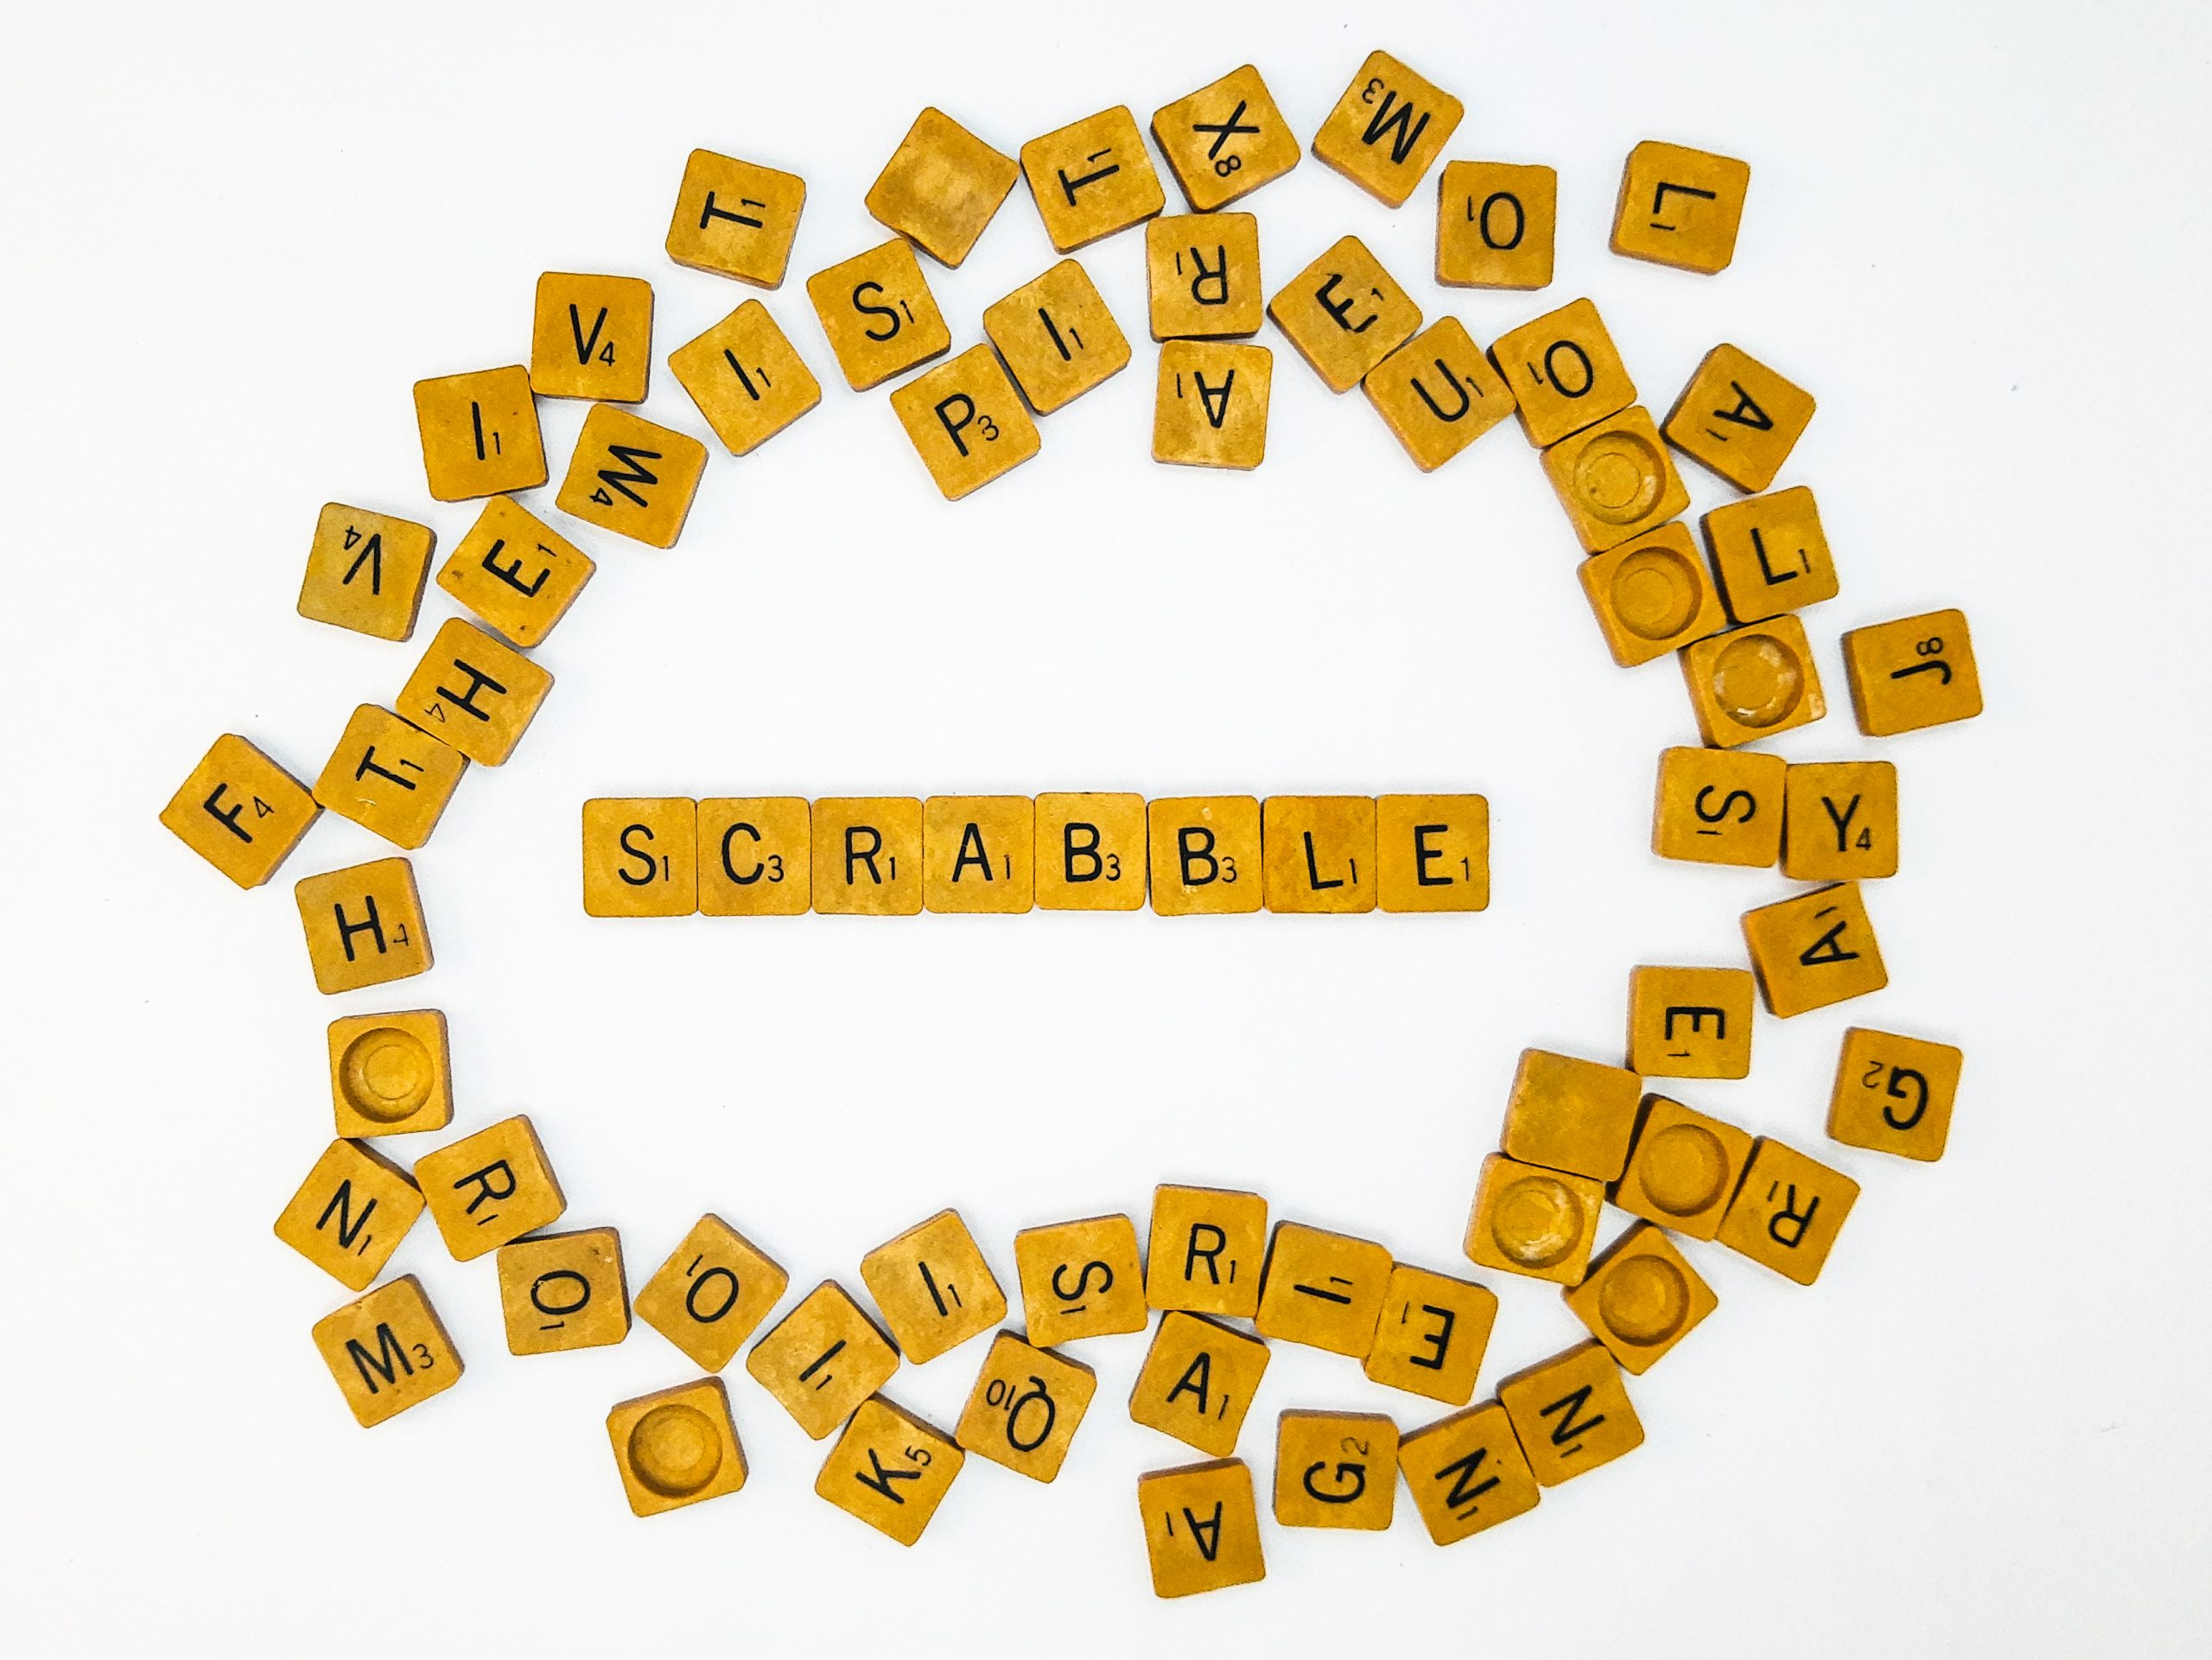 Top view of the game Scrabble